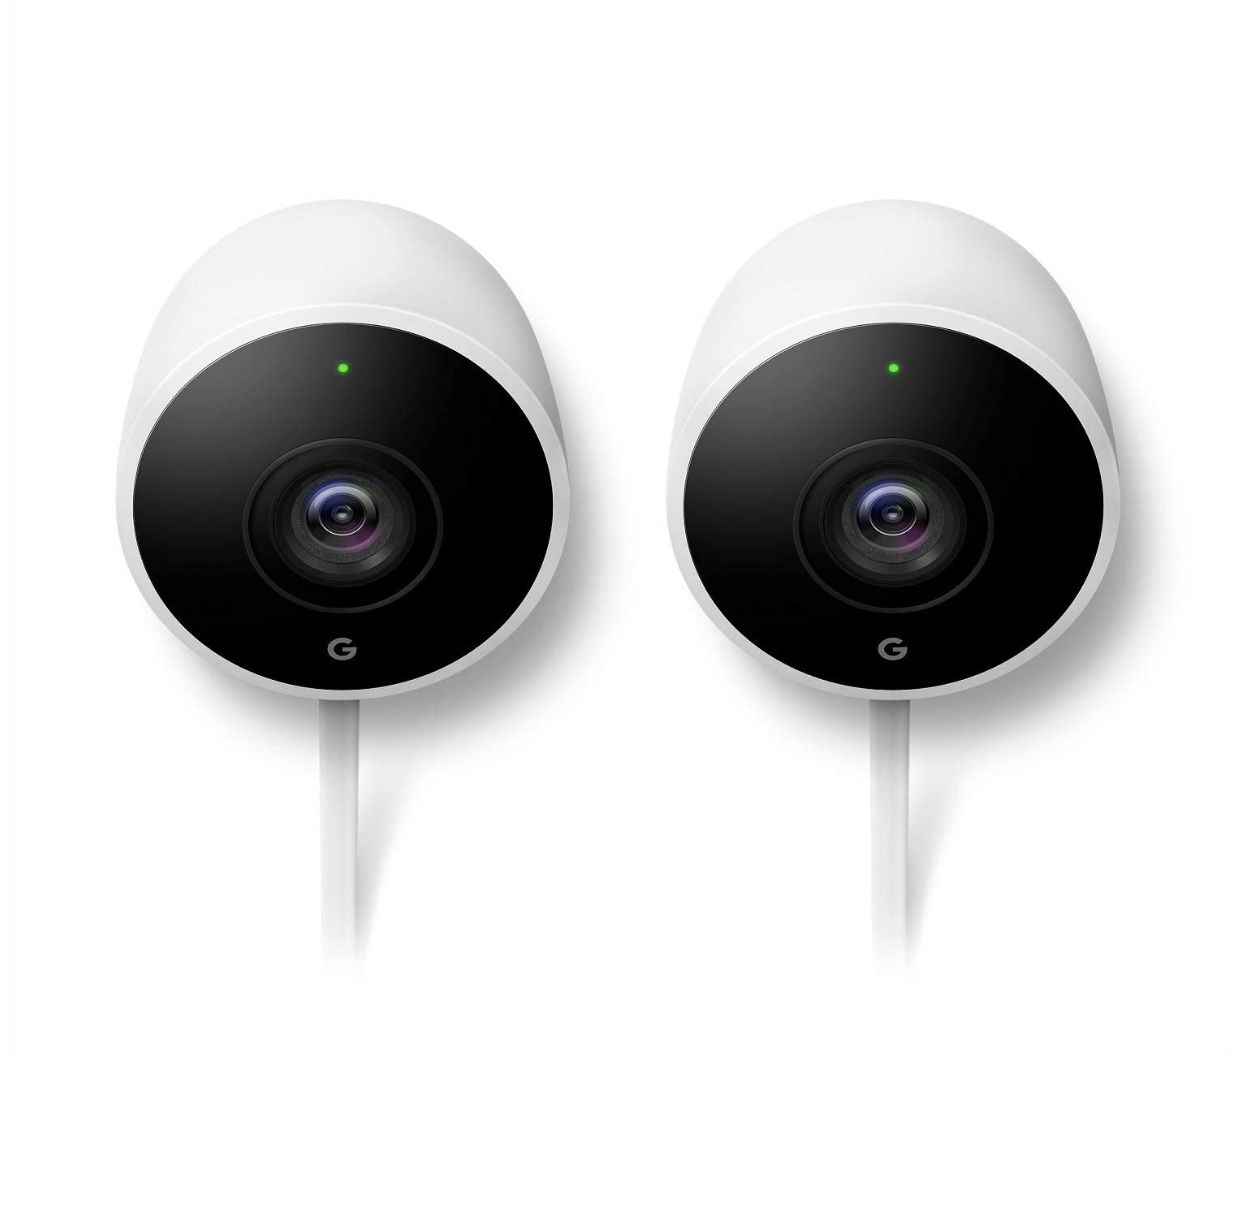 New! Set (two) of NEST Outdoor Security Cameras